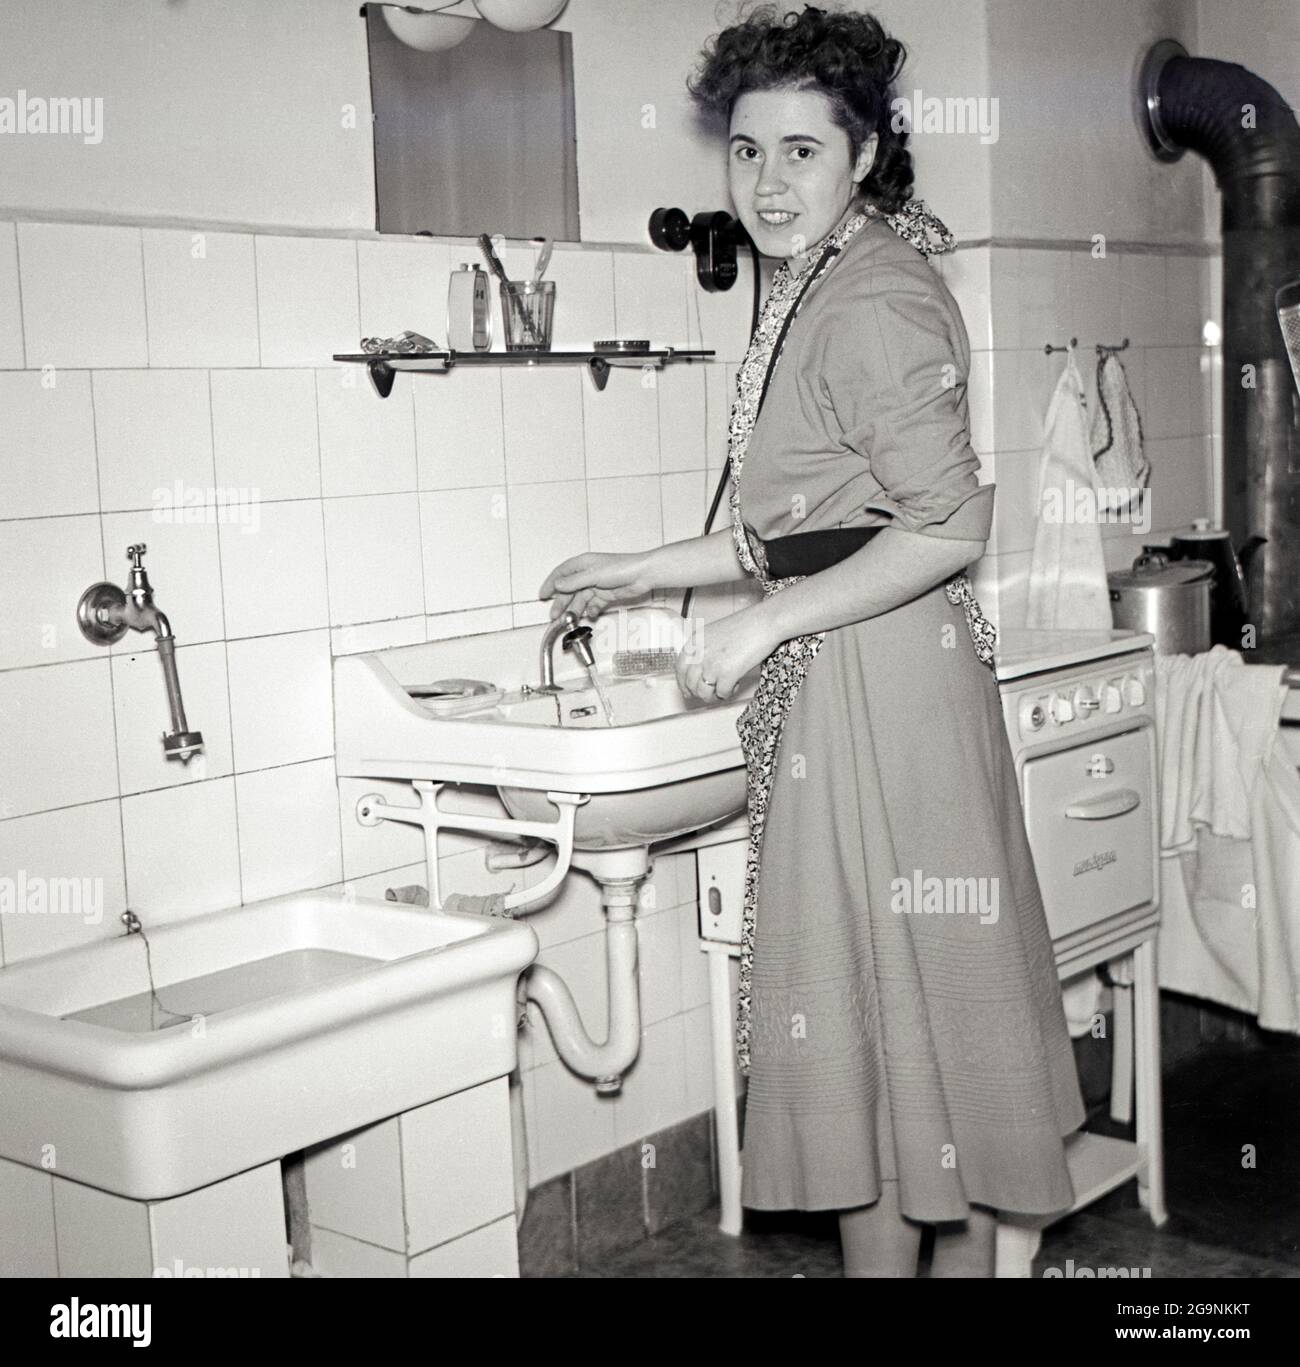 Housewife In The Kitchen Infront Of A Washbasin Europe Germany 